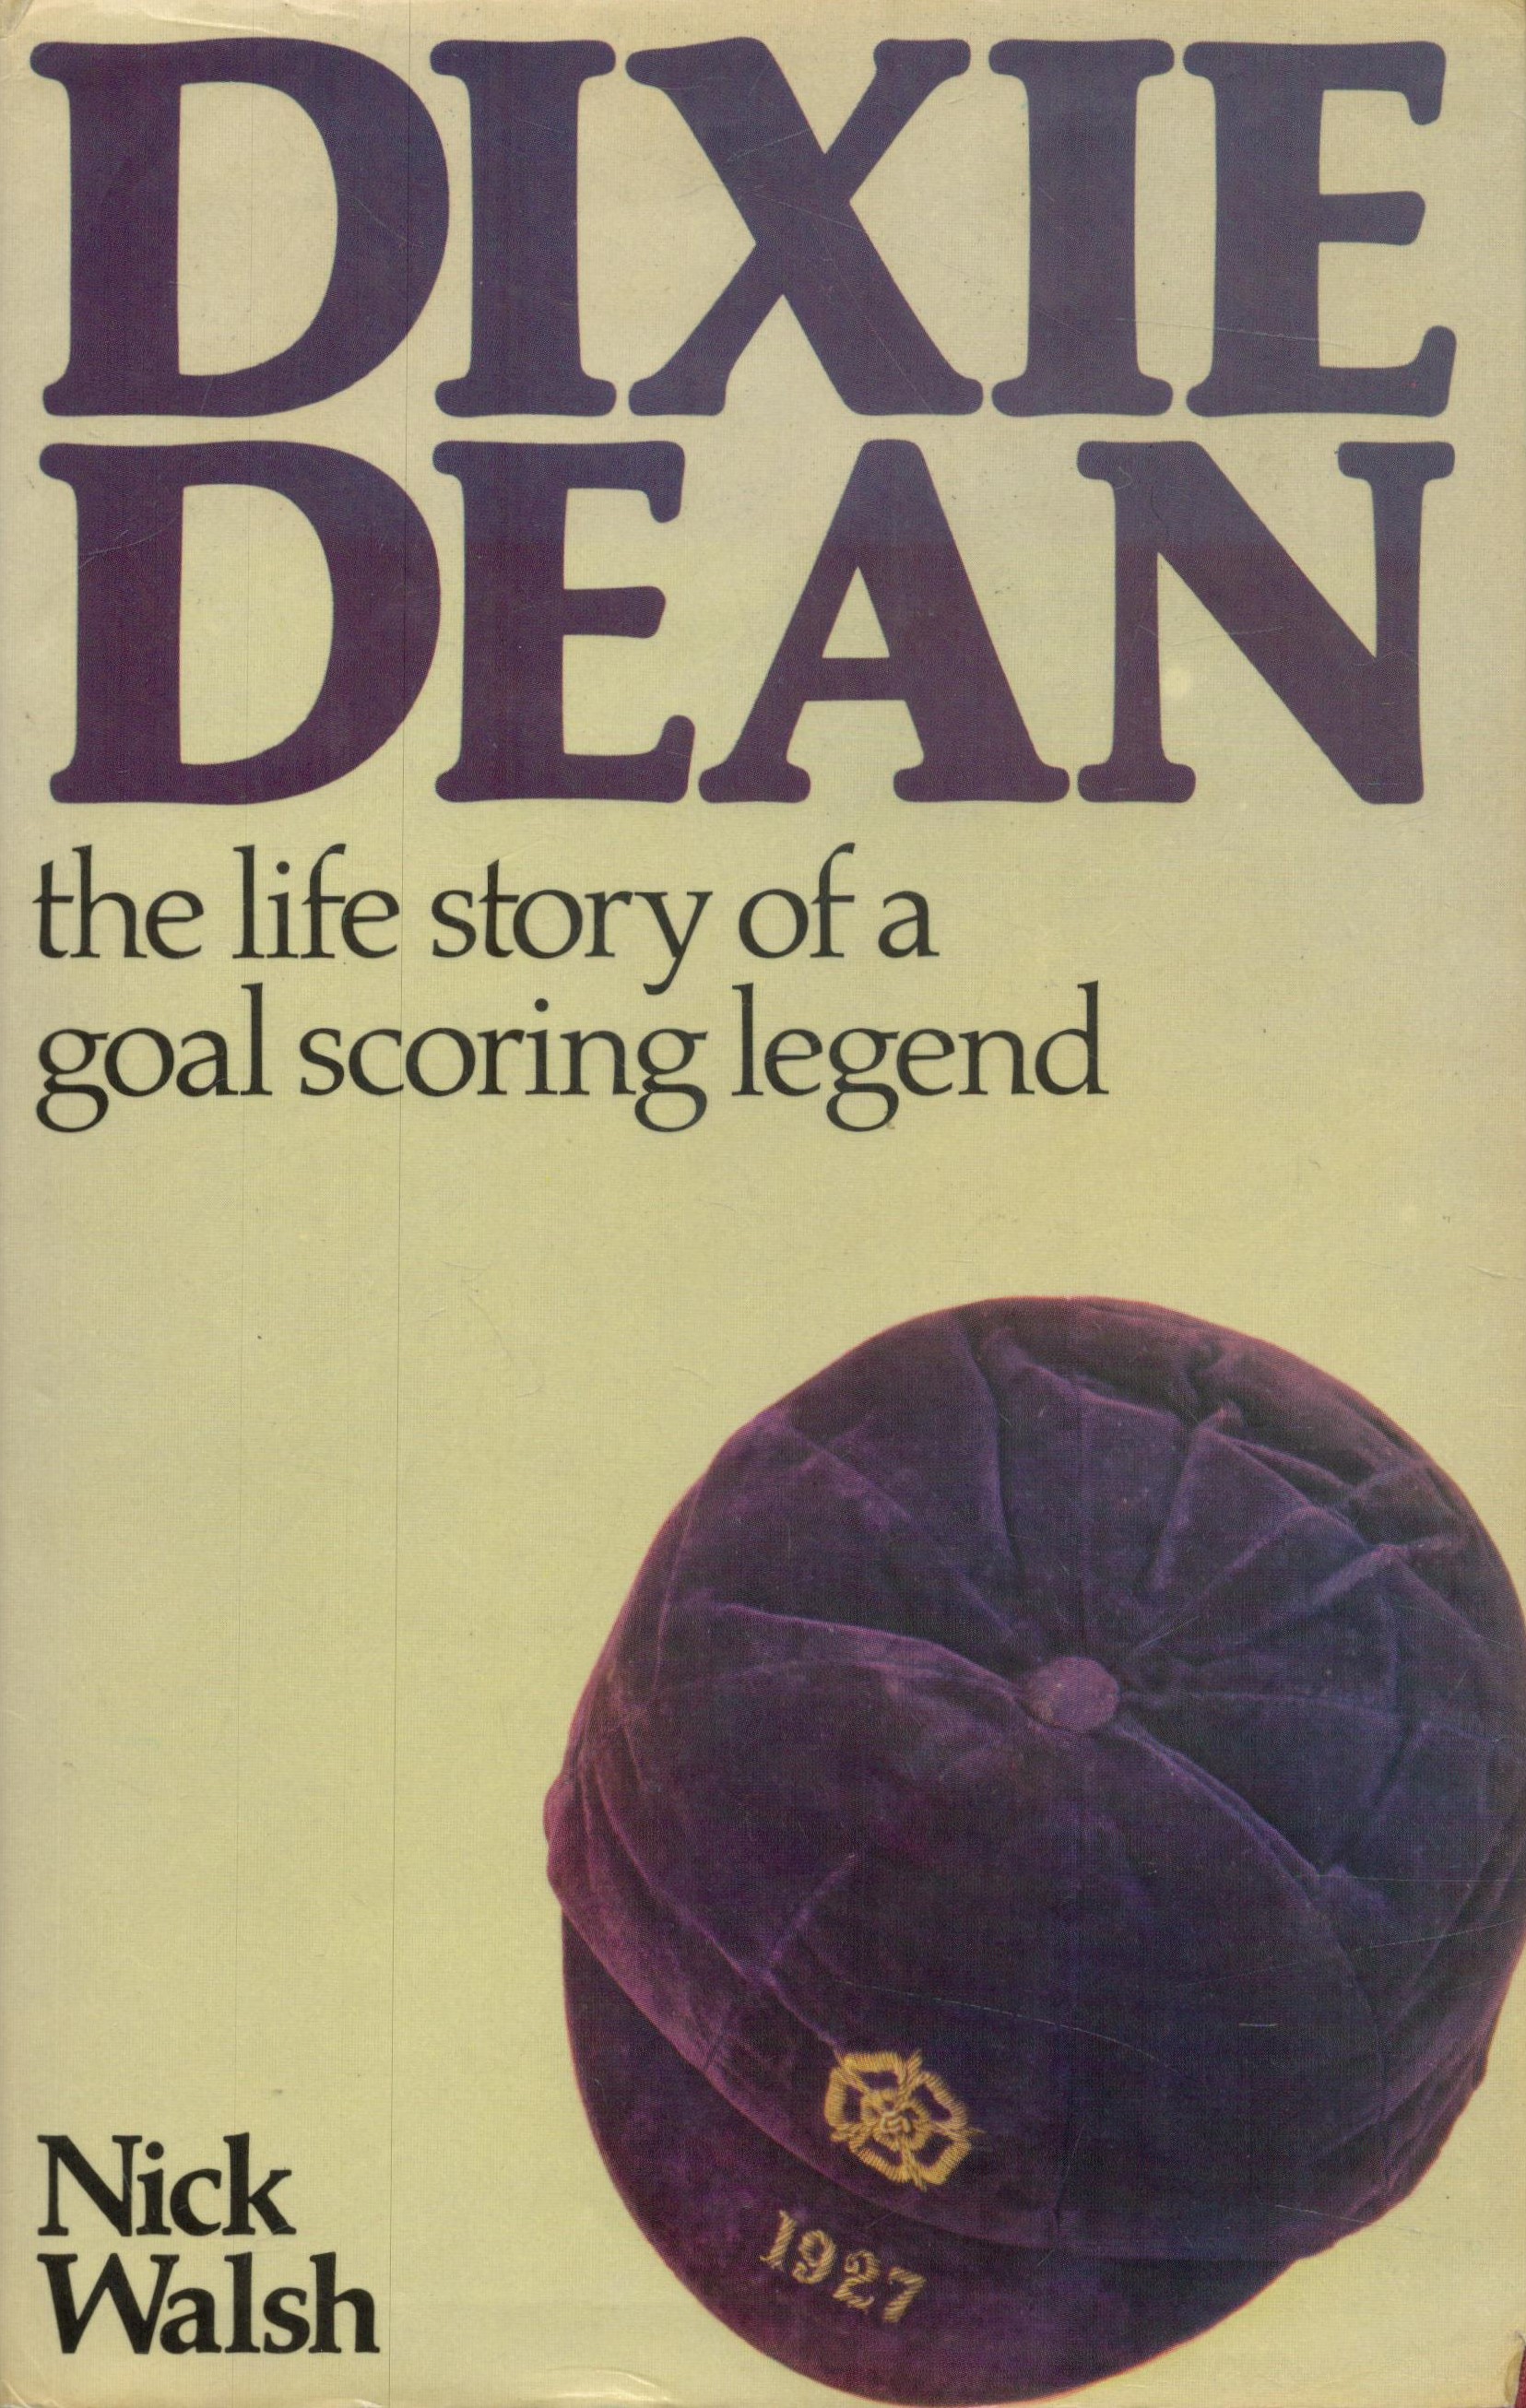 Dixie Dean signed Dixie Dean The Life Story Of A Goal Scoring Legend and 3 other signatures hardback